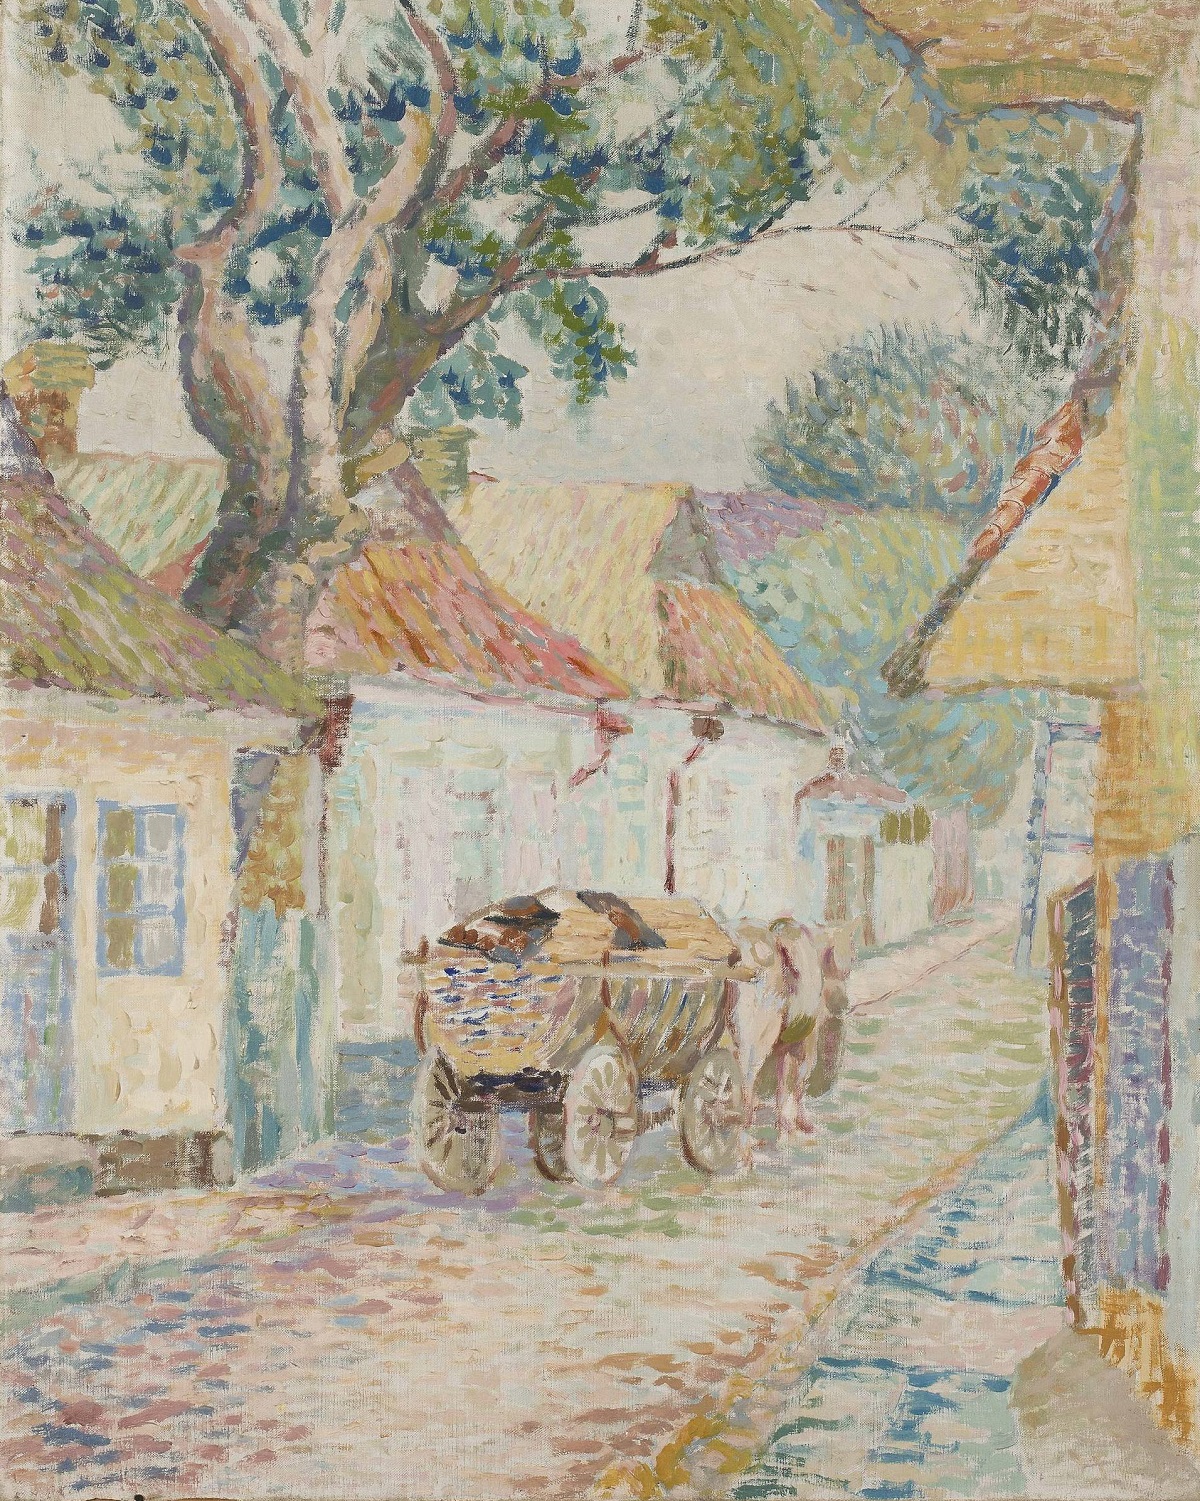 Landscape with a Horse-Cart